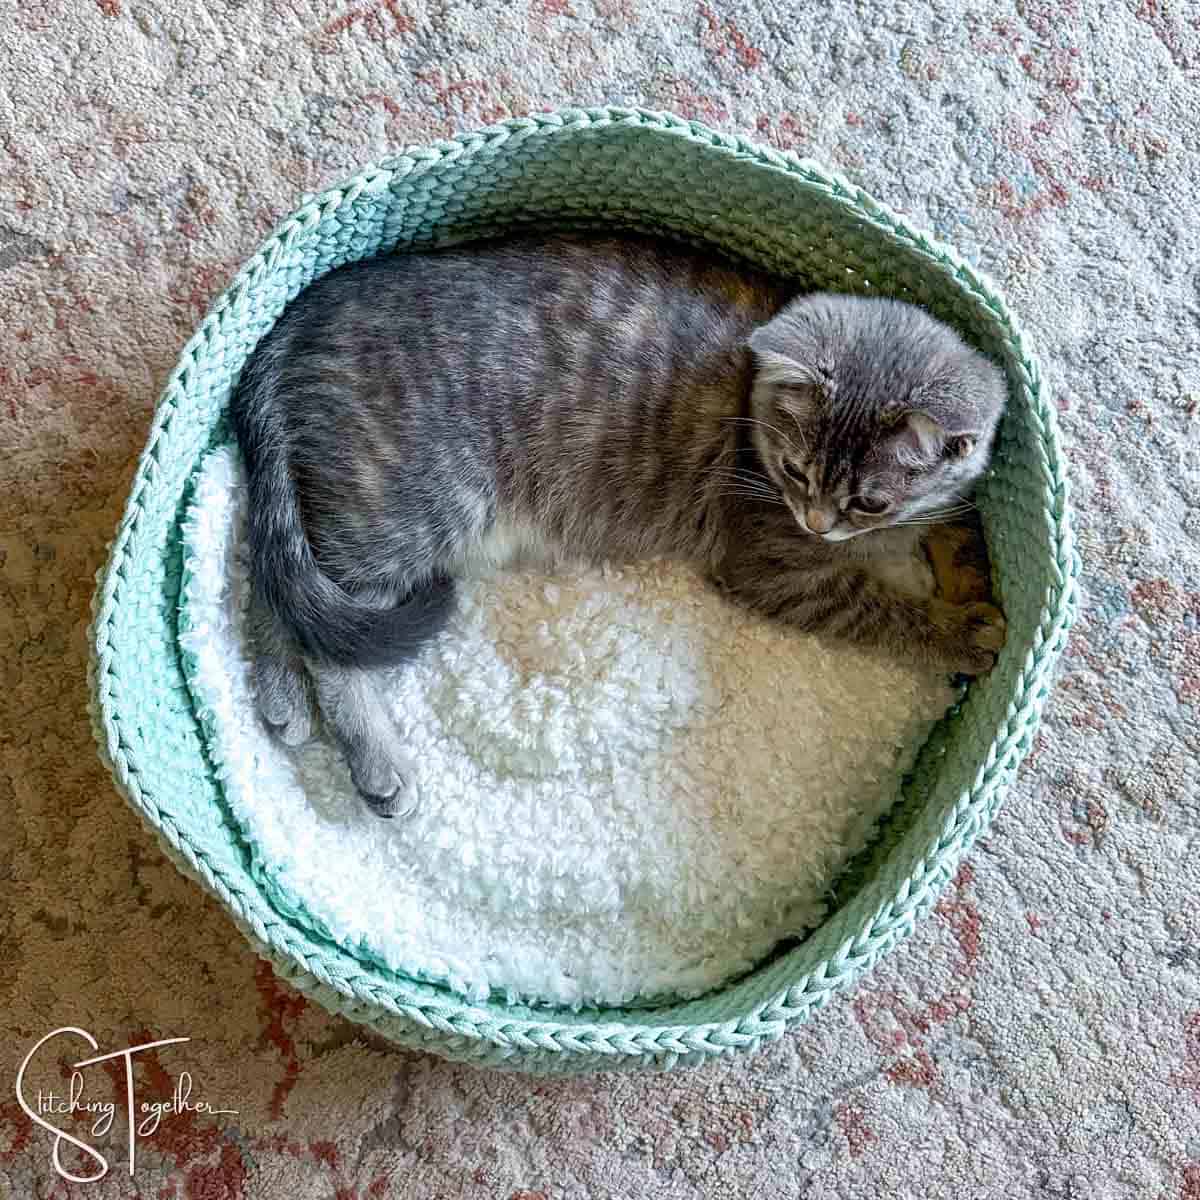 kitten in a crochet bed that's light green on the outside walls and fuzzy white inside